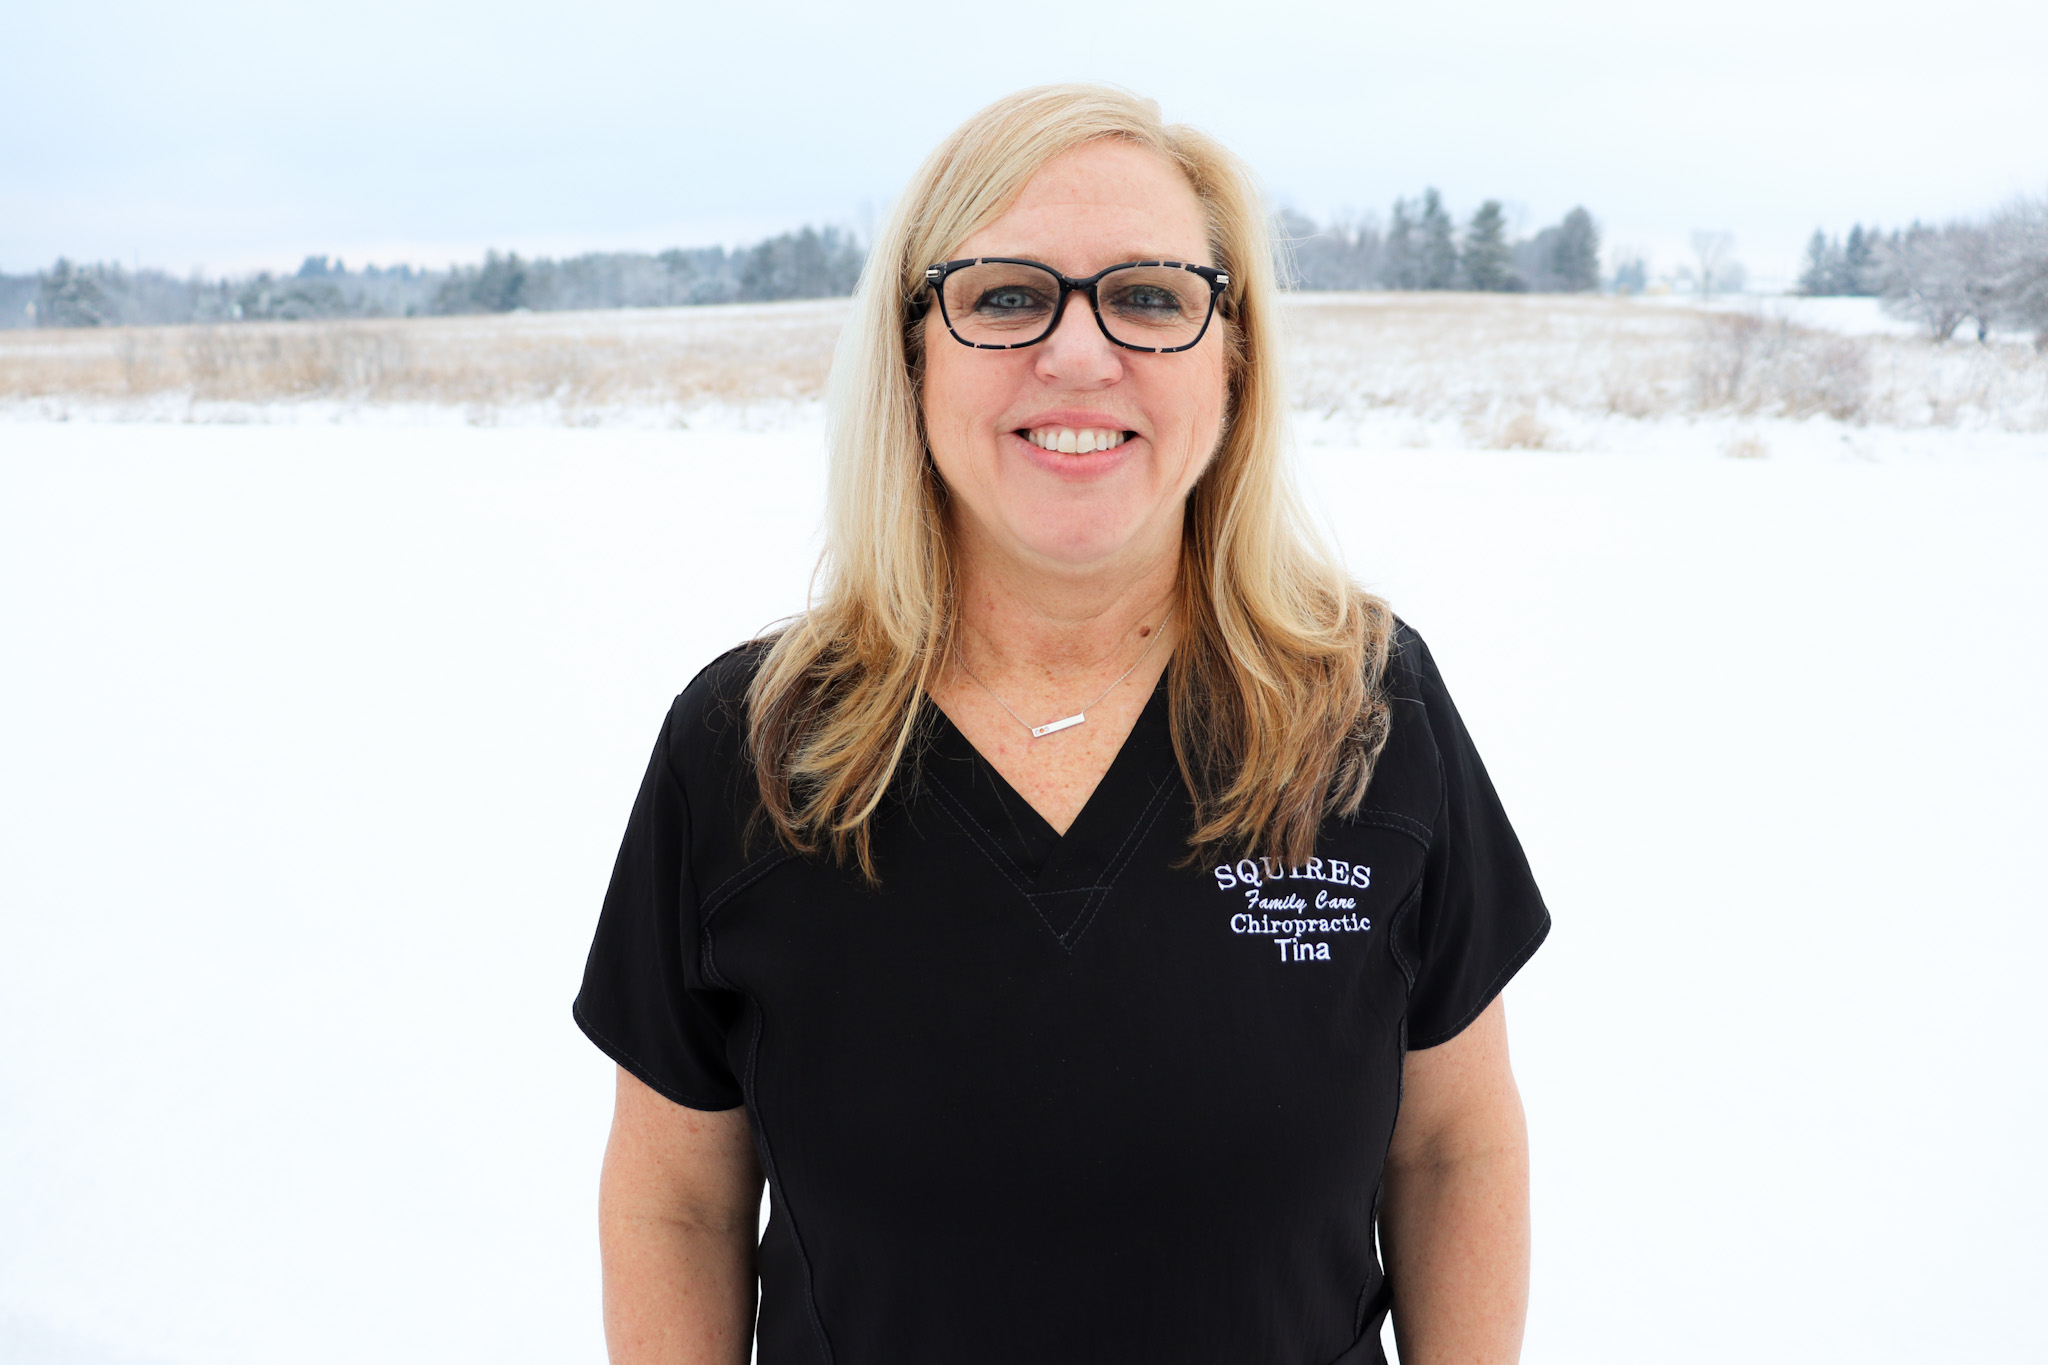 Tina from Squires Chiropractic - Scottville, Michigan